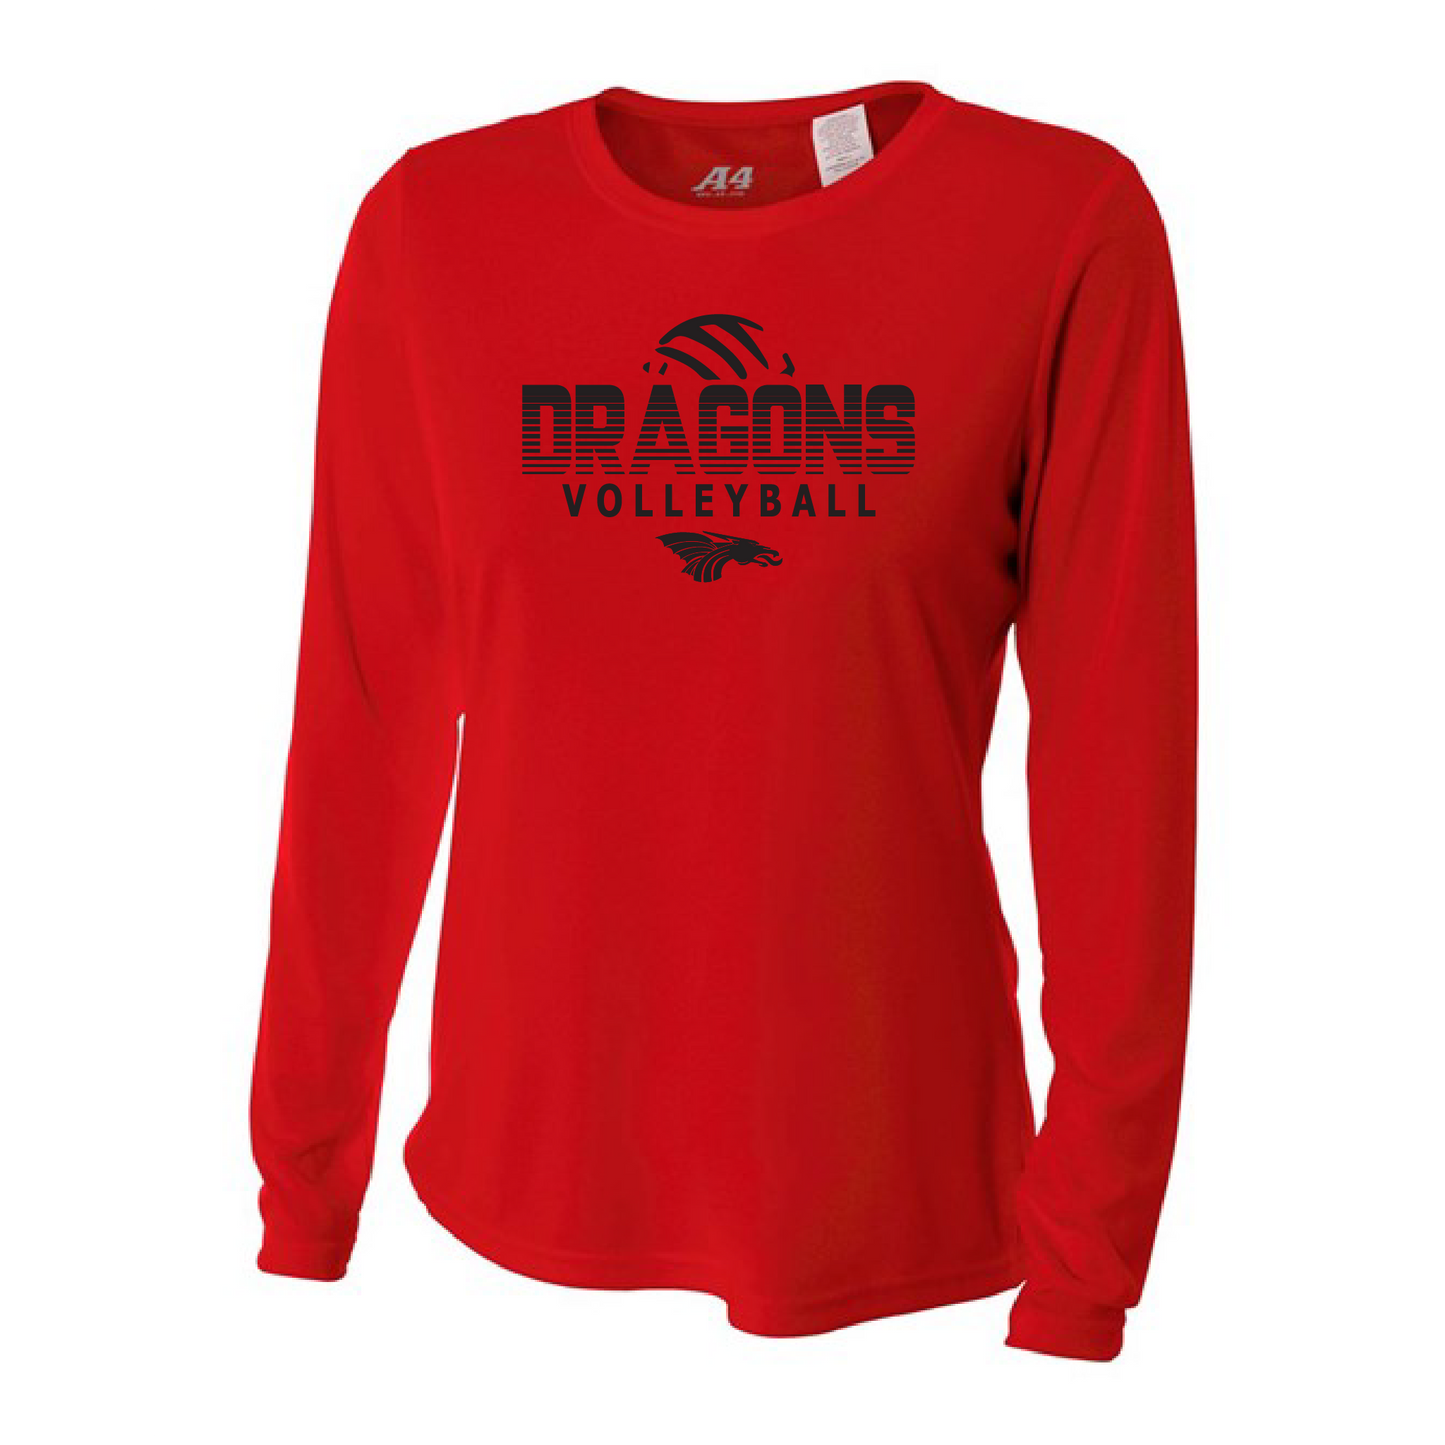 Womens L/S T-Shirt - Dragons Volleyball